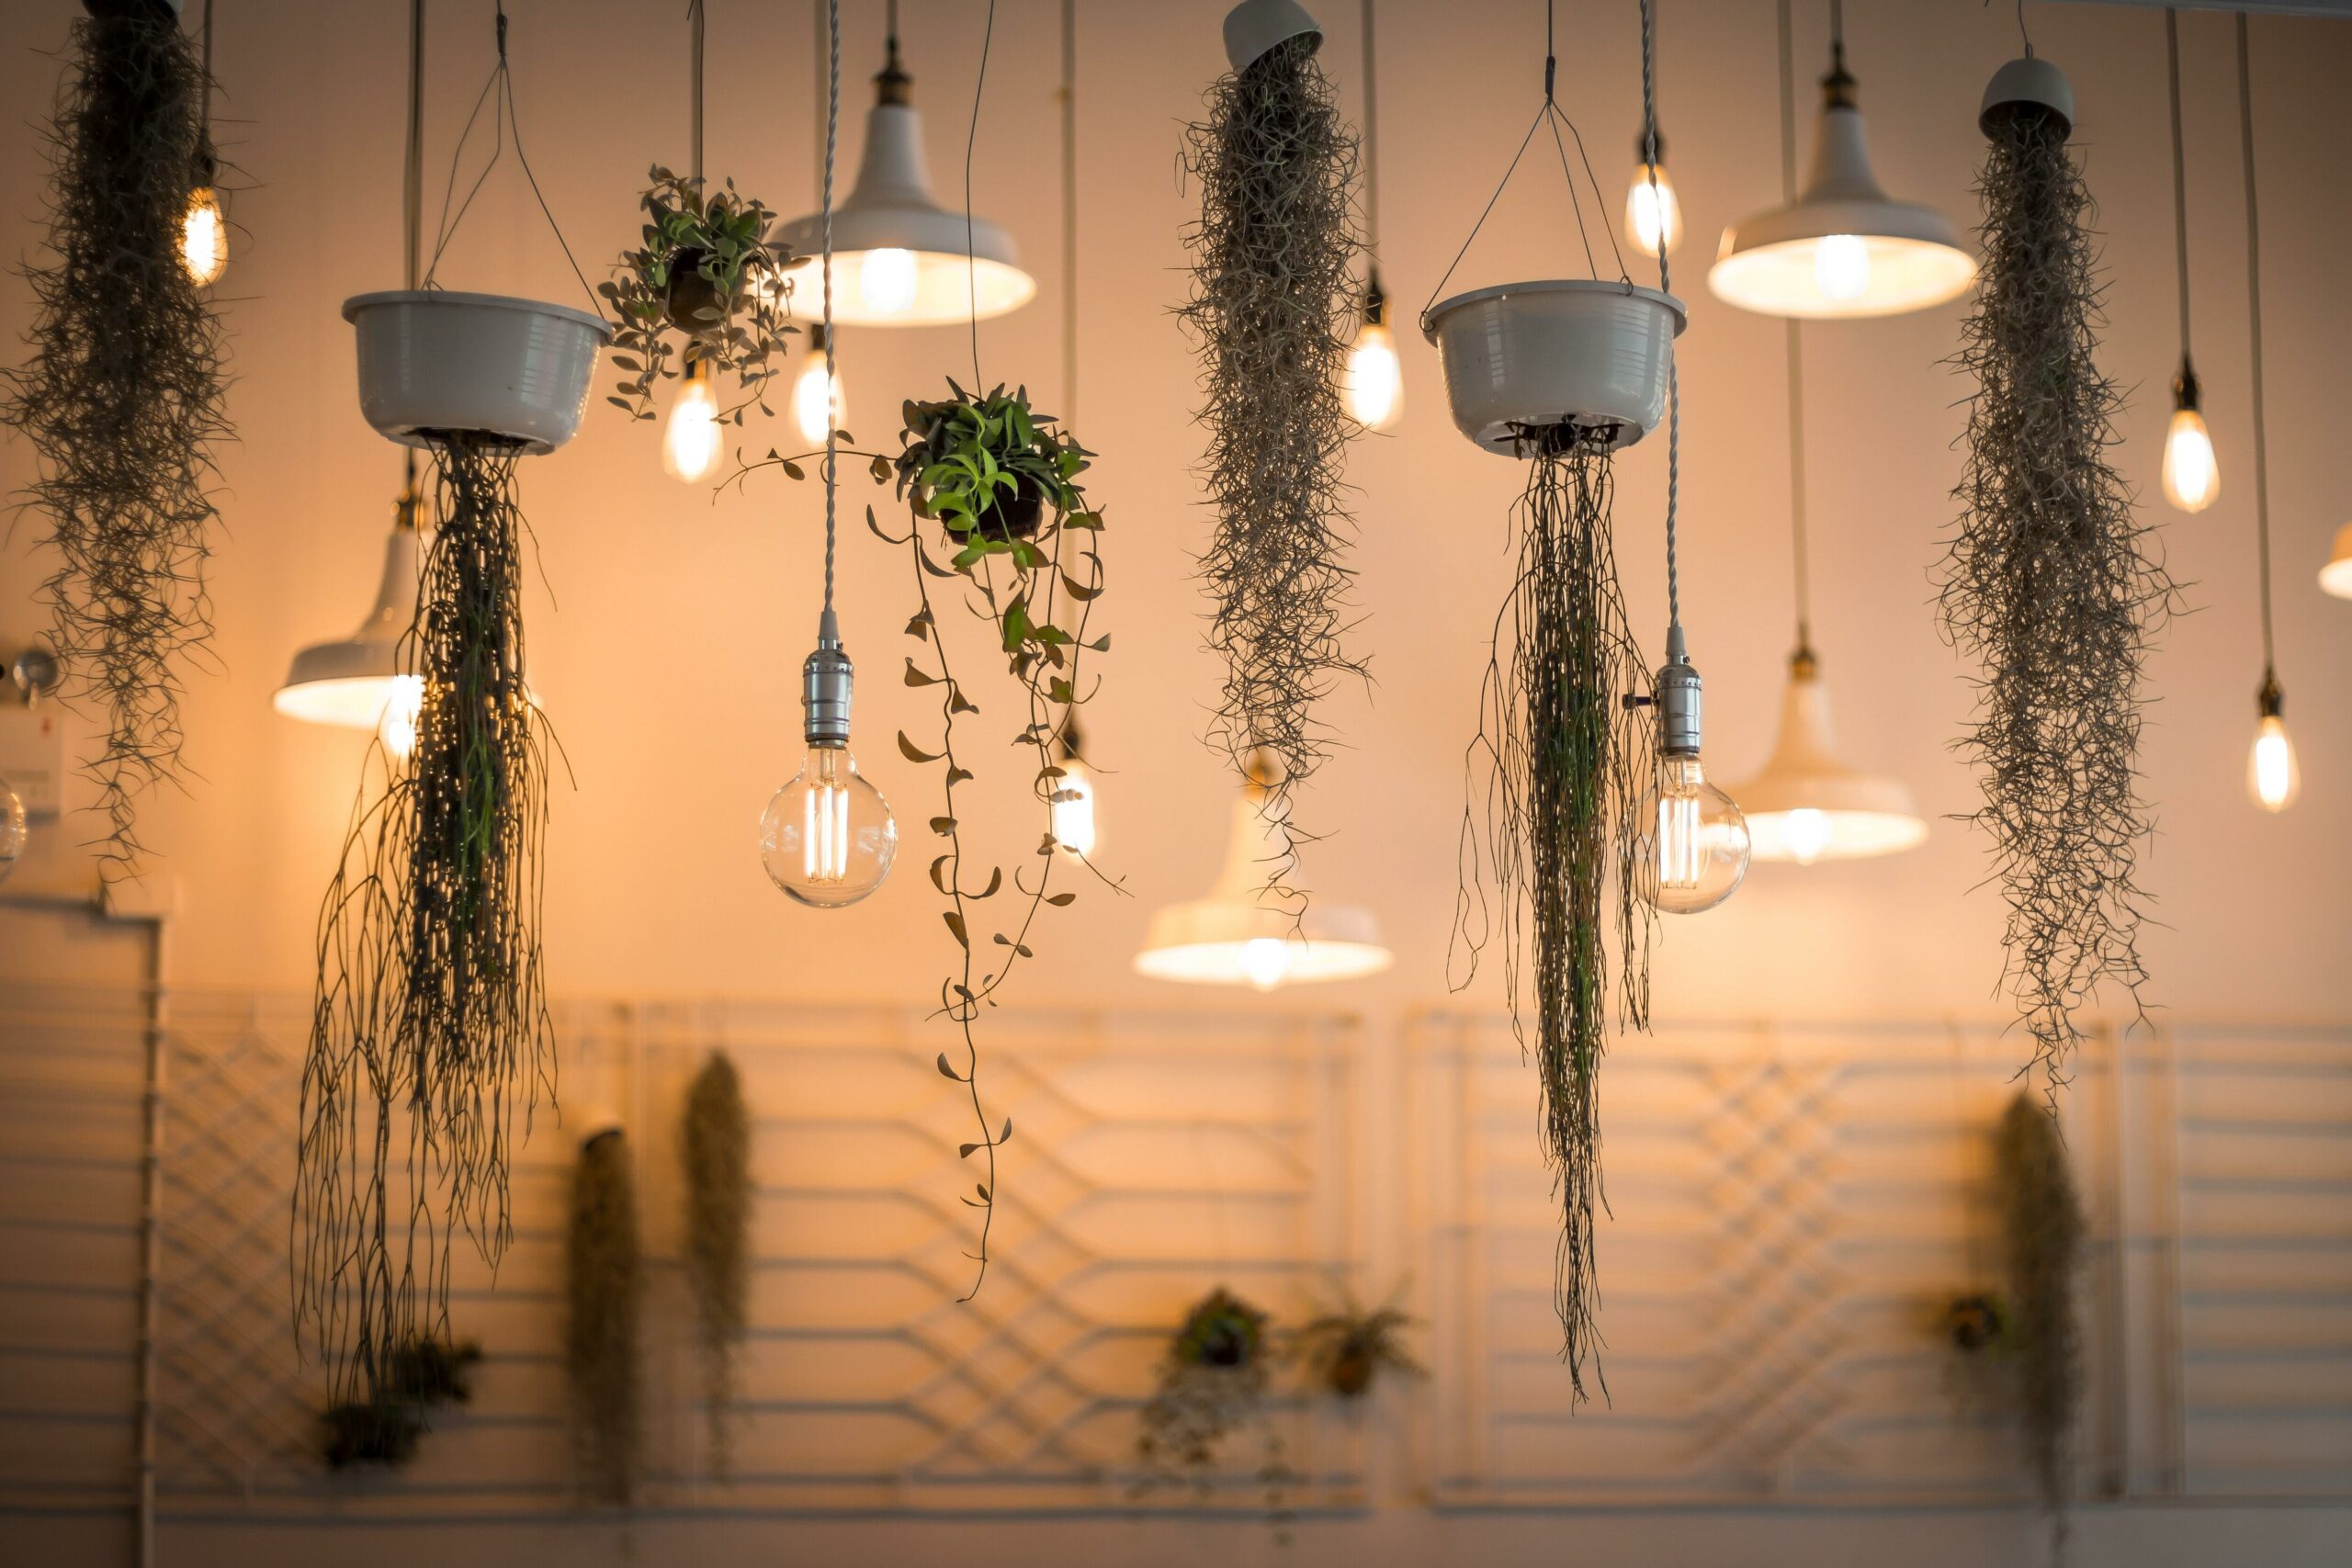 A room filled with hanging plants and light bulbs.